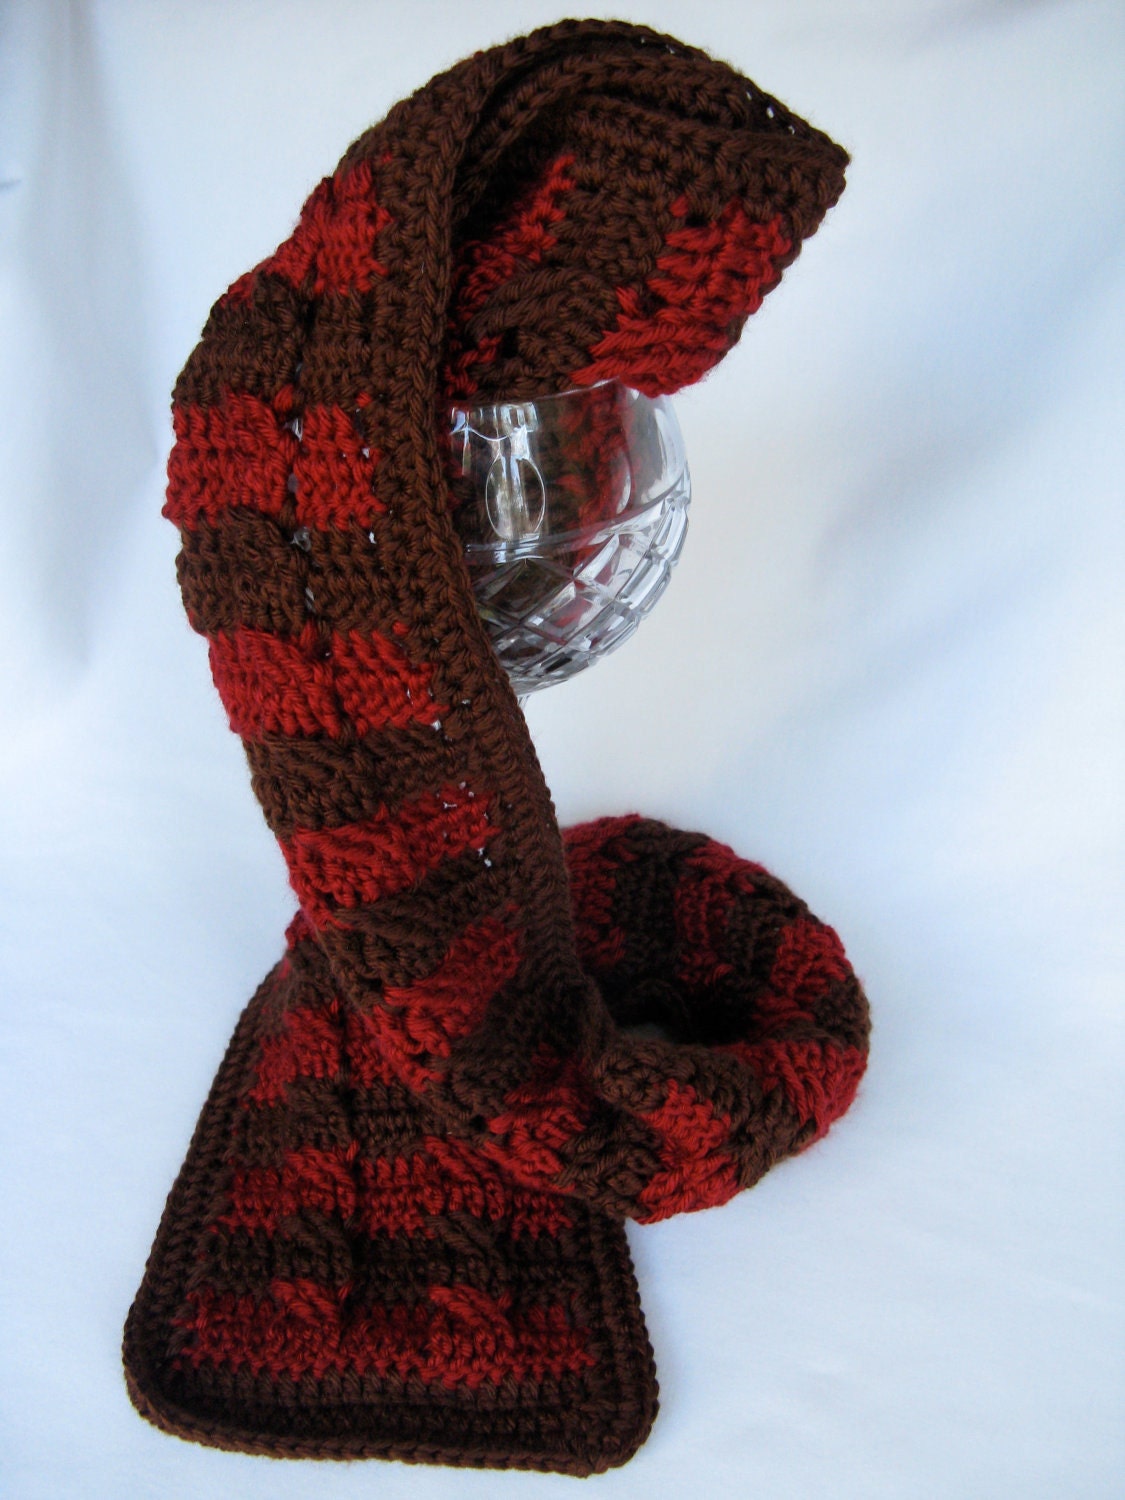 Striped Crochet Cabled Scarf - Chocolate and Cranberry - Unisex - Gift Idea